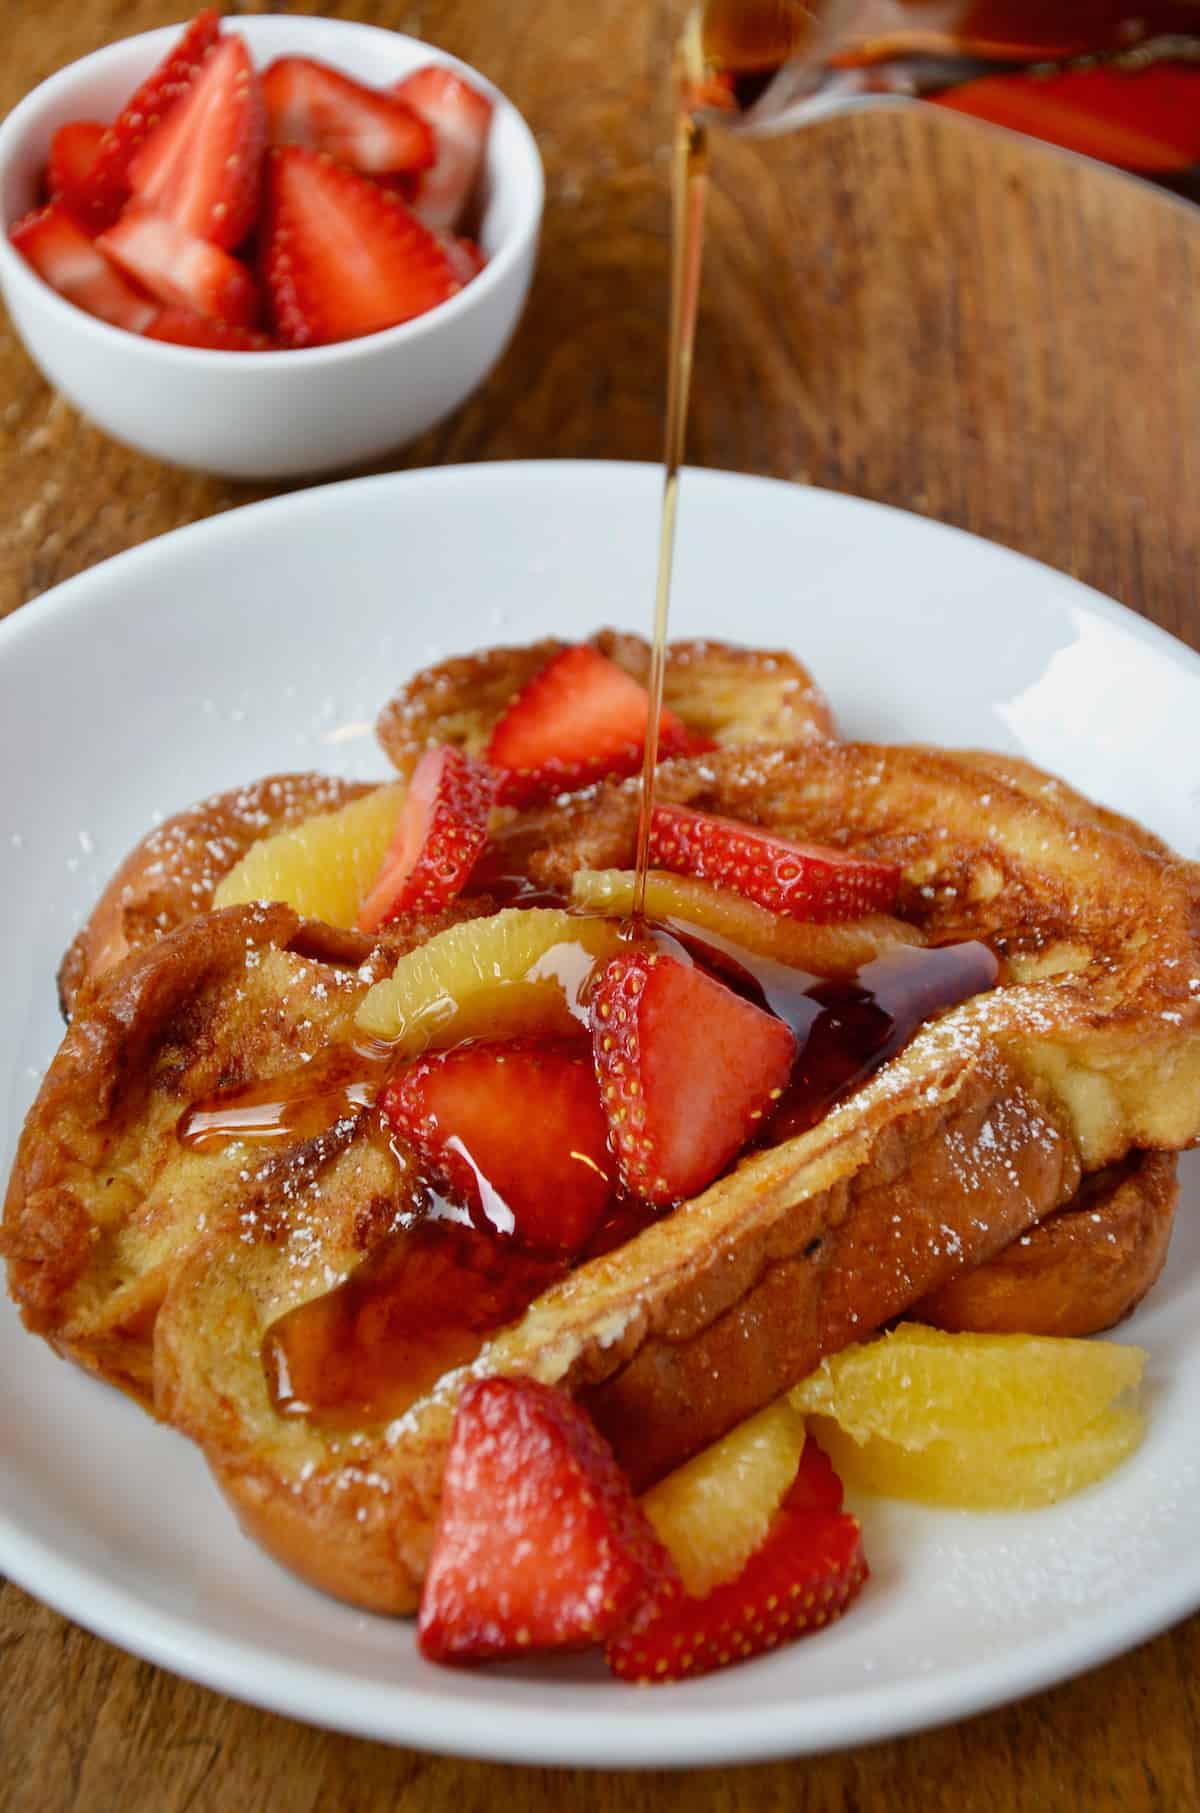 On a white plate, challah French toast is topped with sliced strawberries and orange segments and is being drizzled with maple syrup.